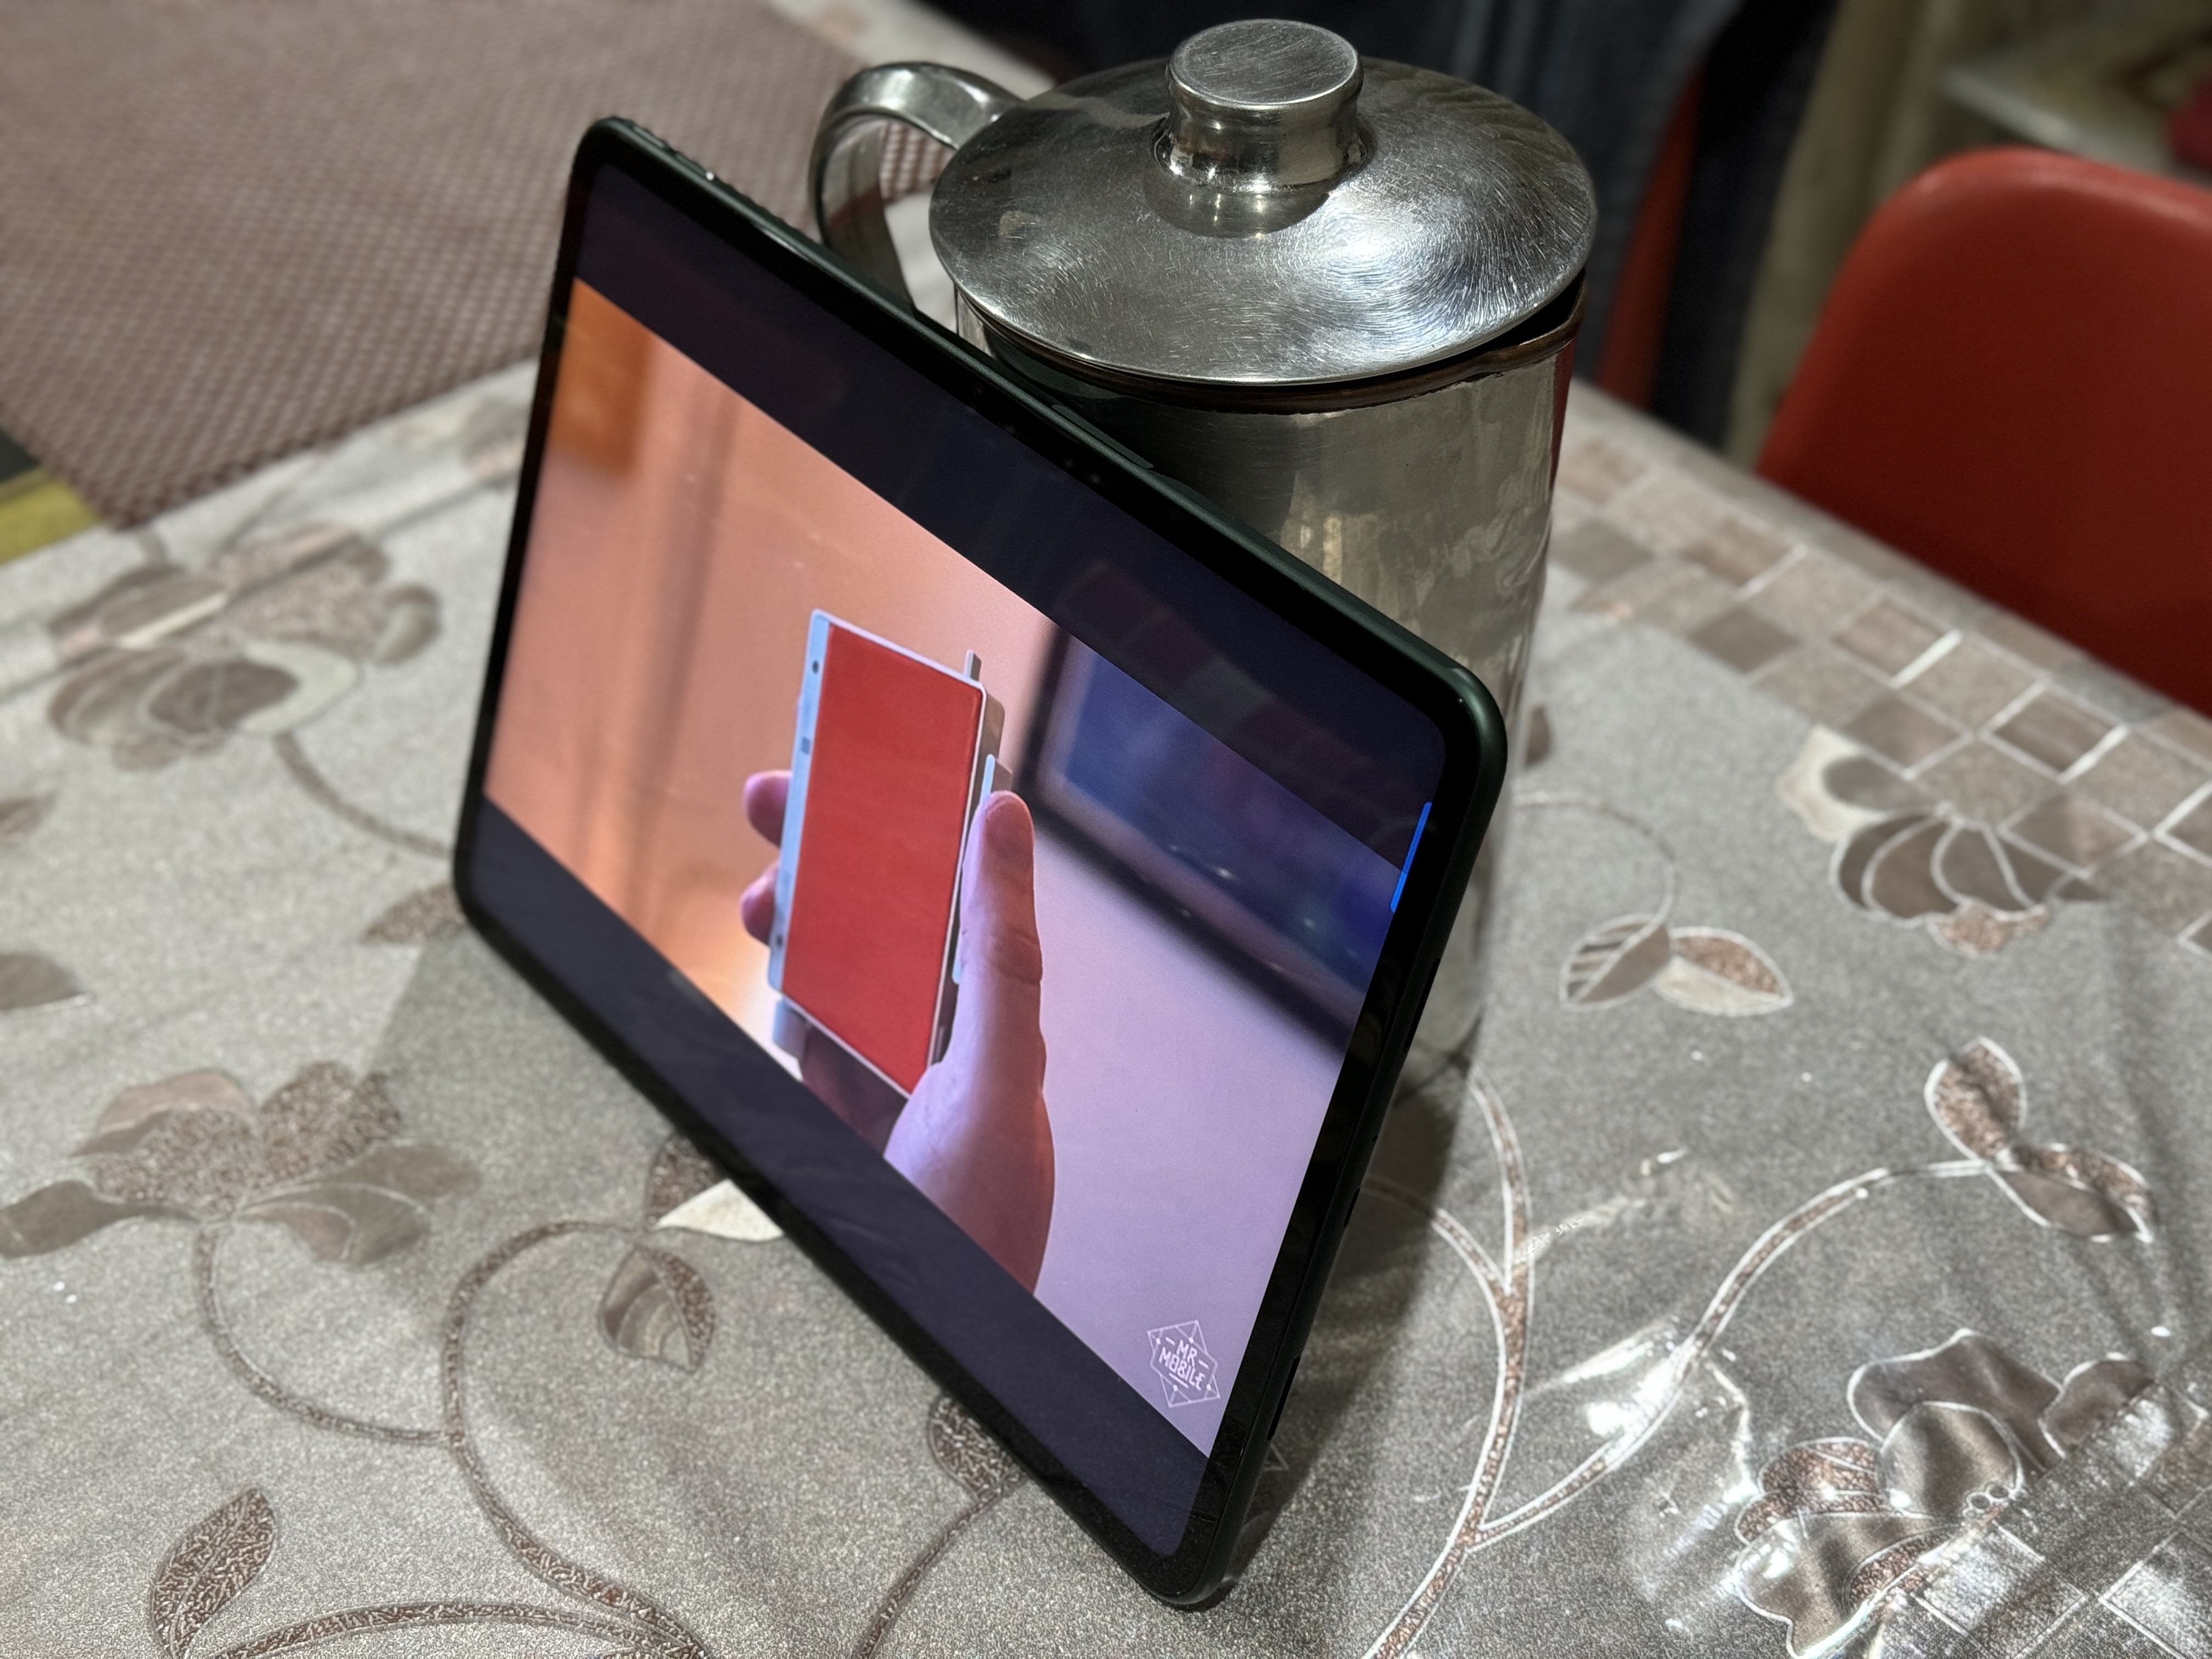 OnePlus Pad propped up with the help of a jug.